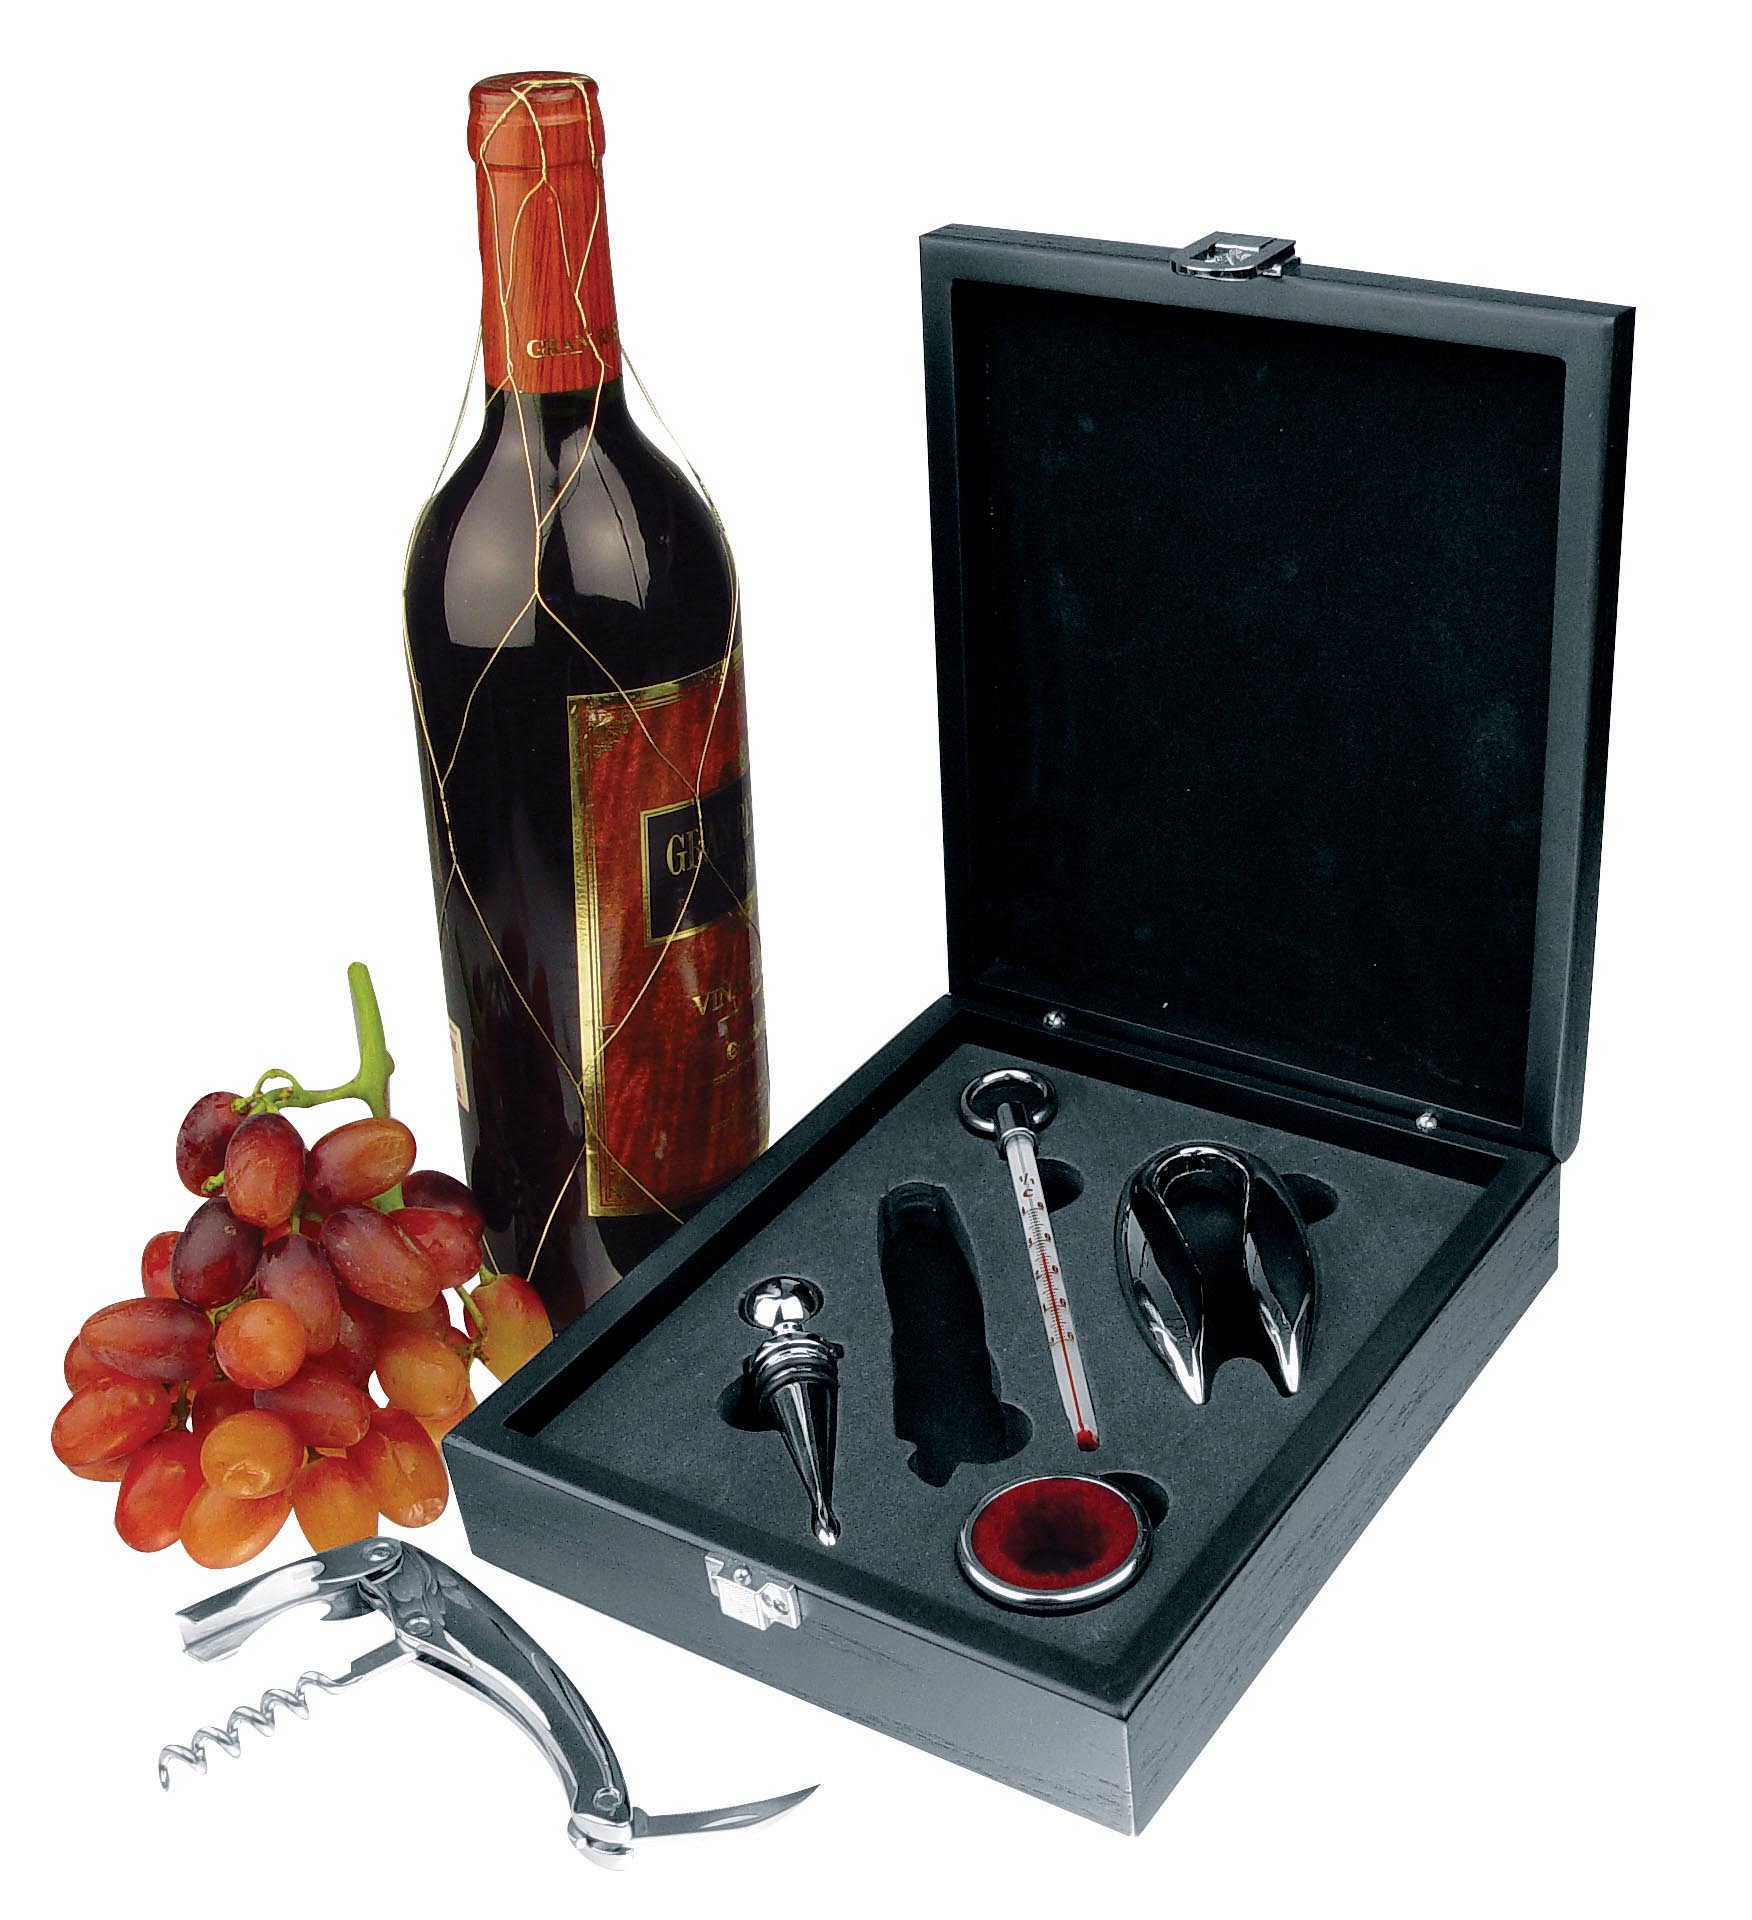 Superior 5-piece wine set in black wooden gift box with opener,